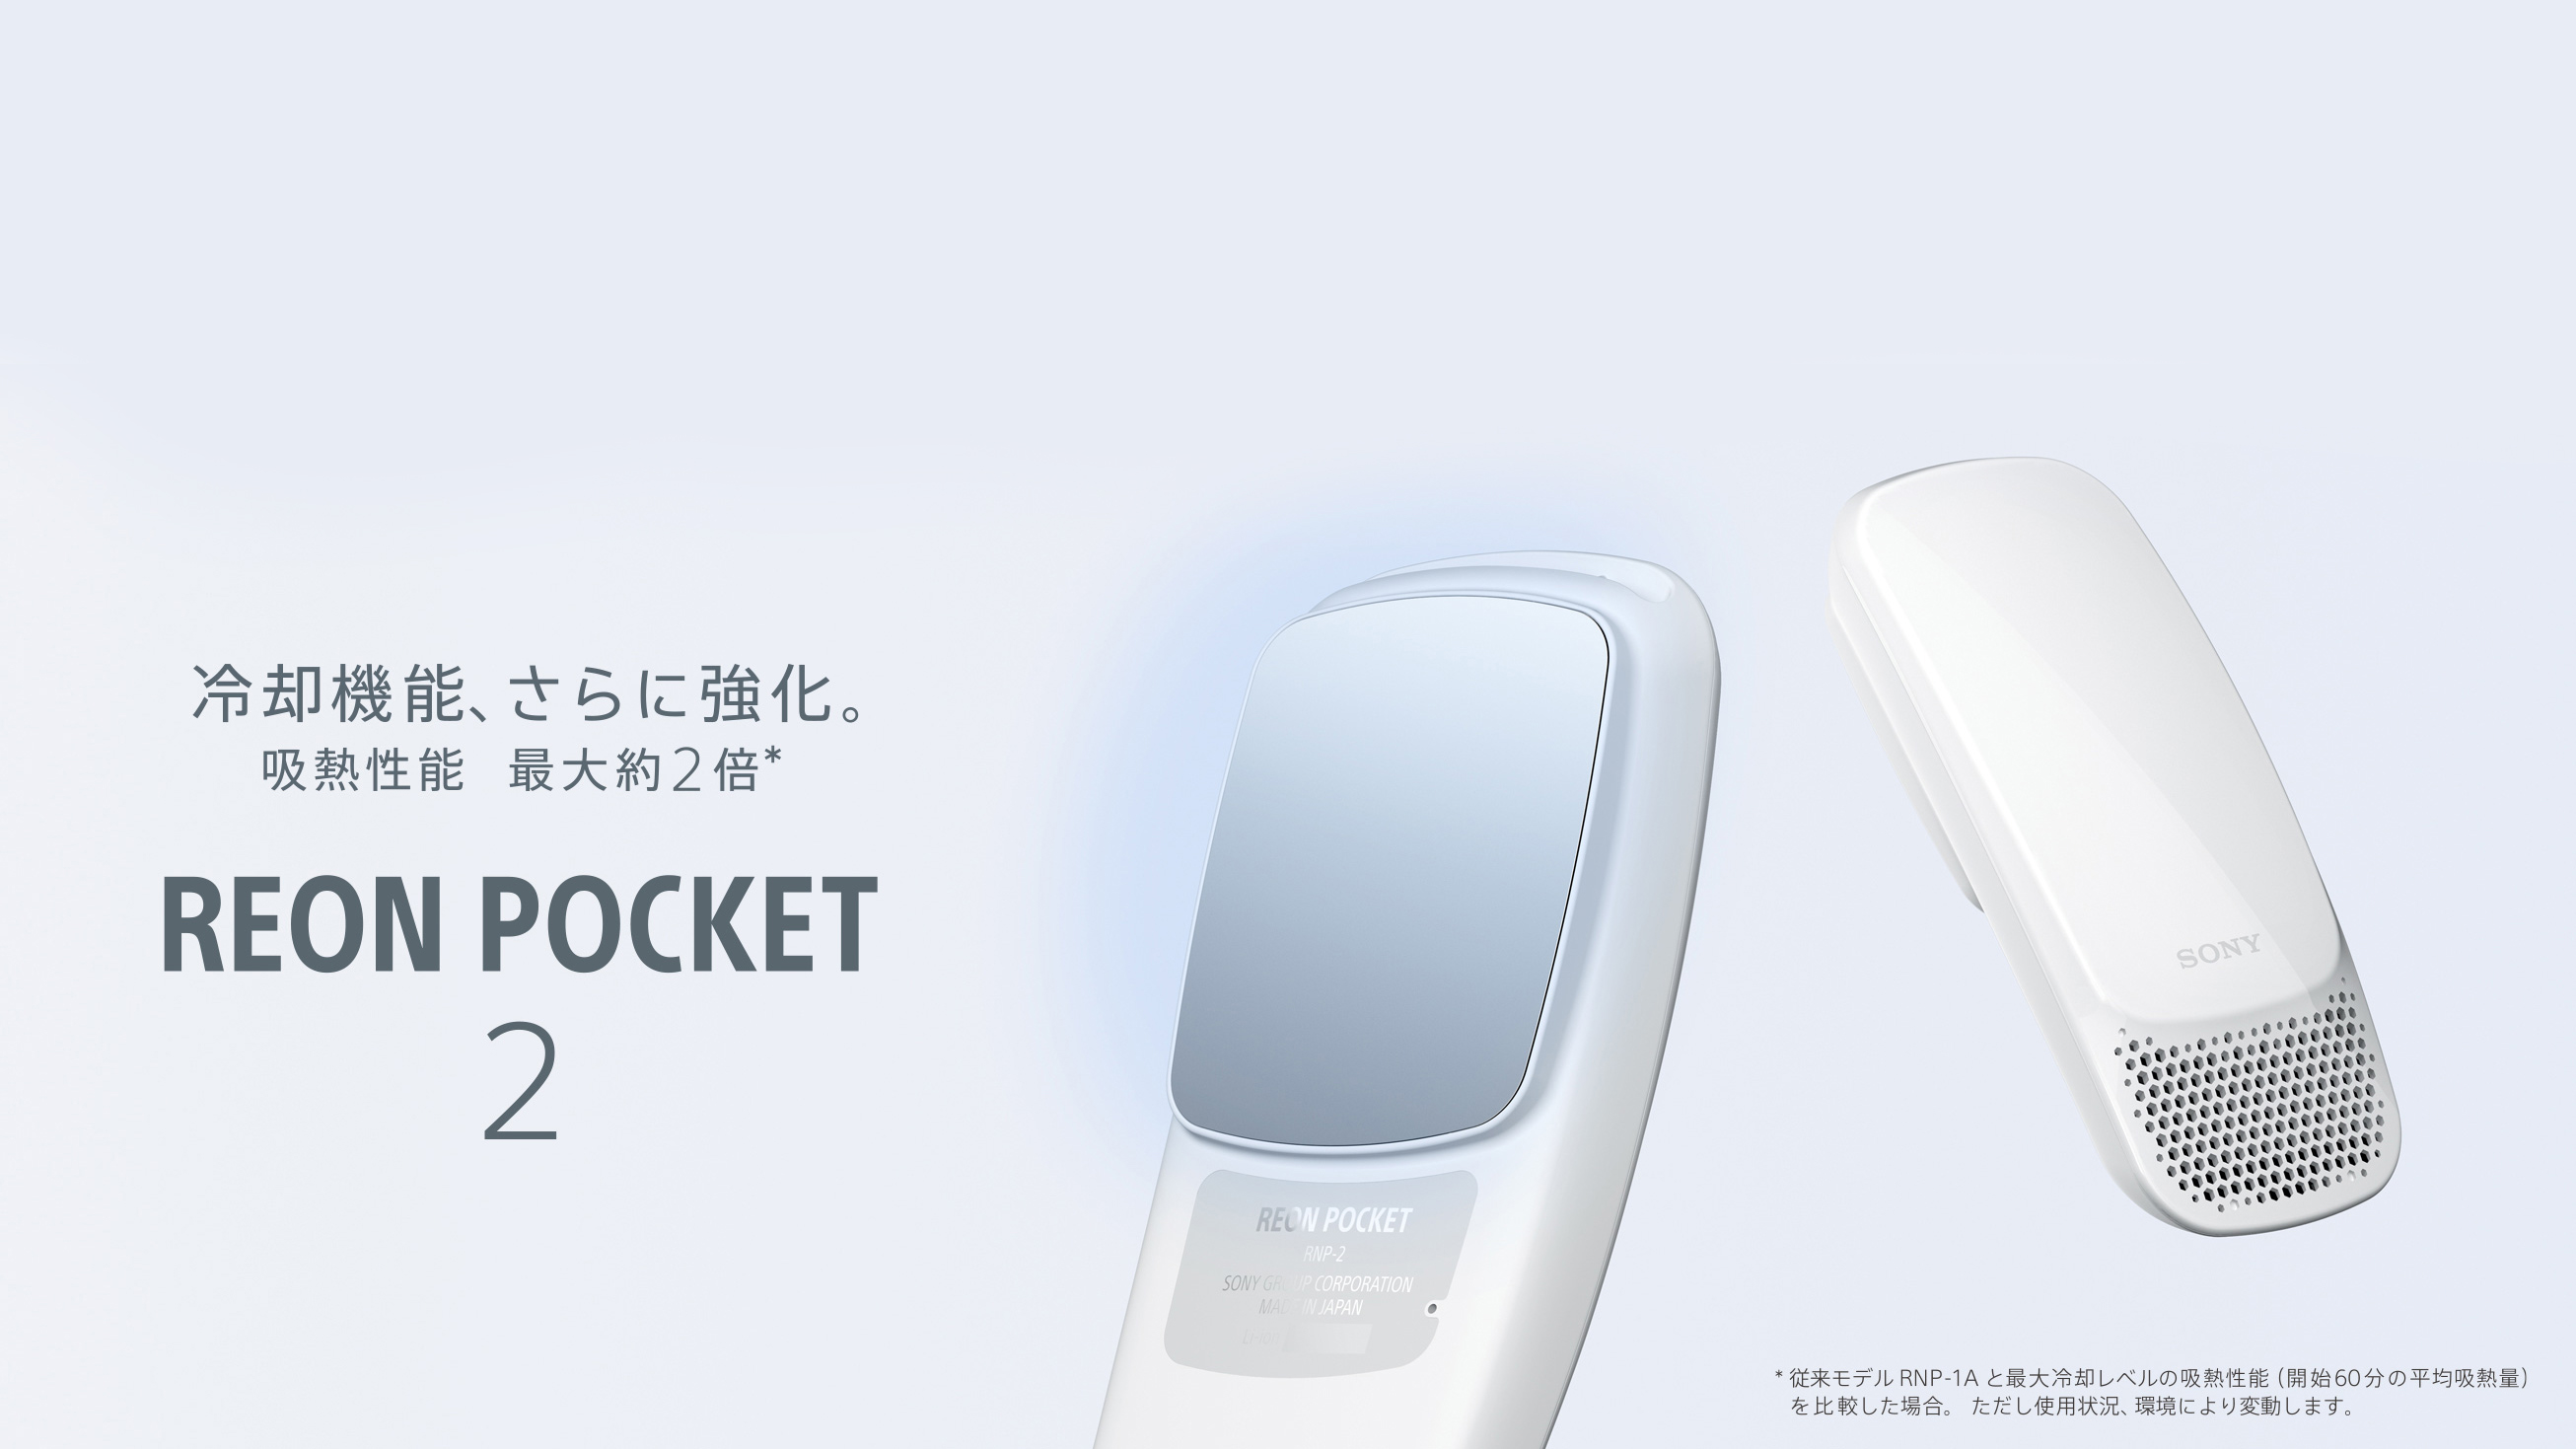 Sony launches Reon Pocket 2 wearable AC; priced at 14,850 yen 